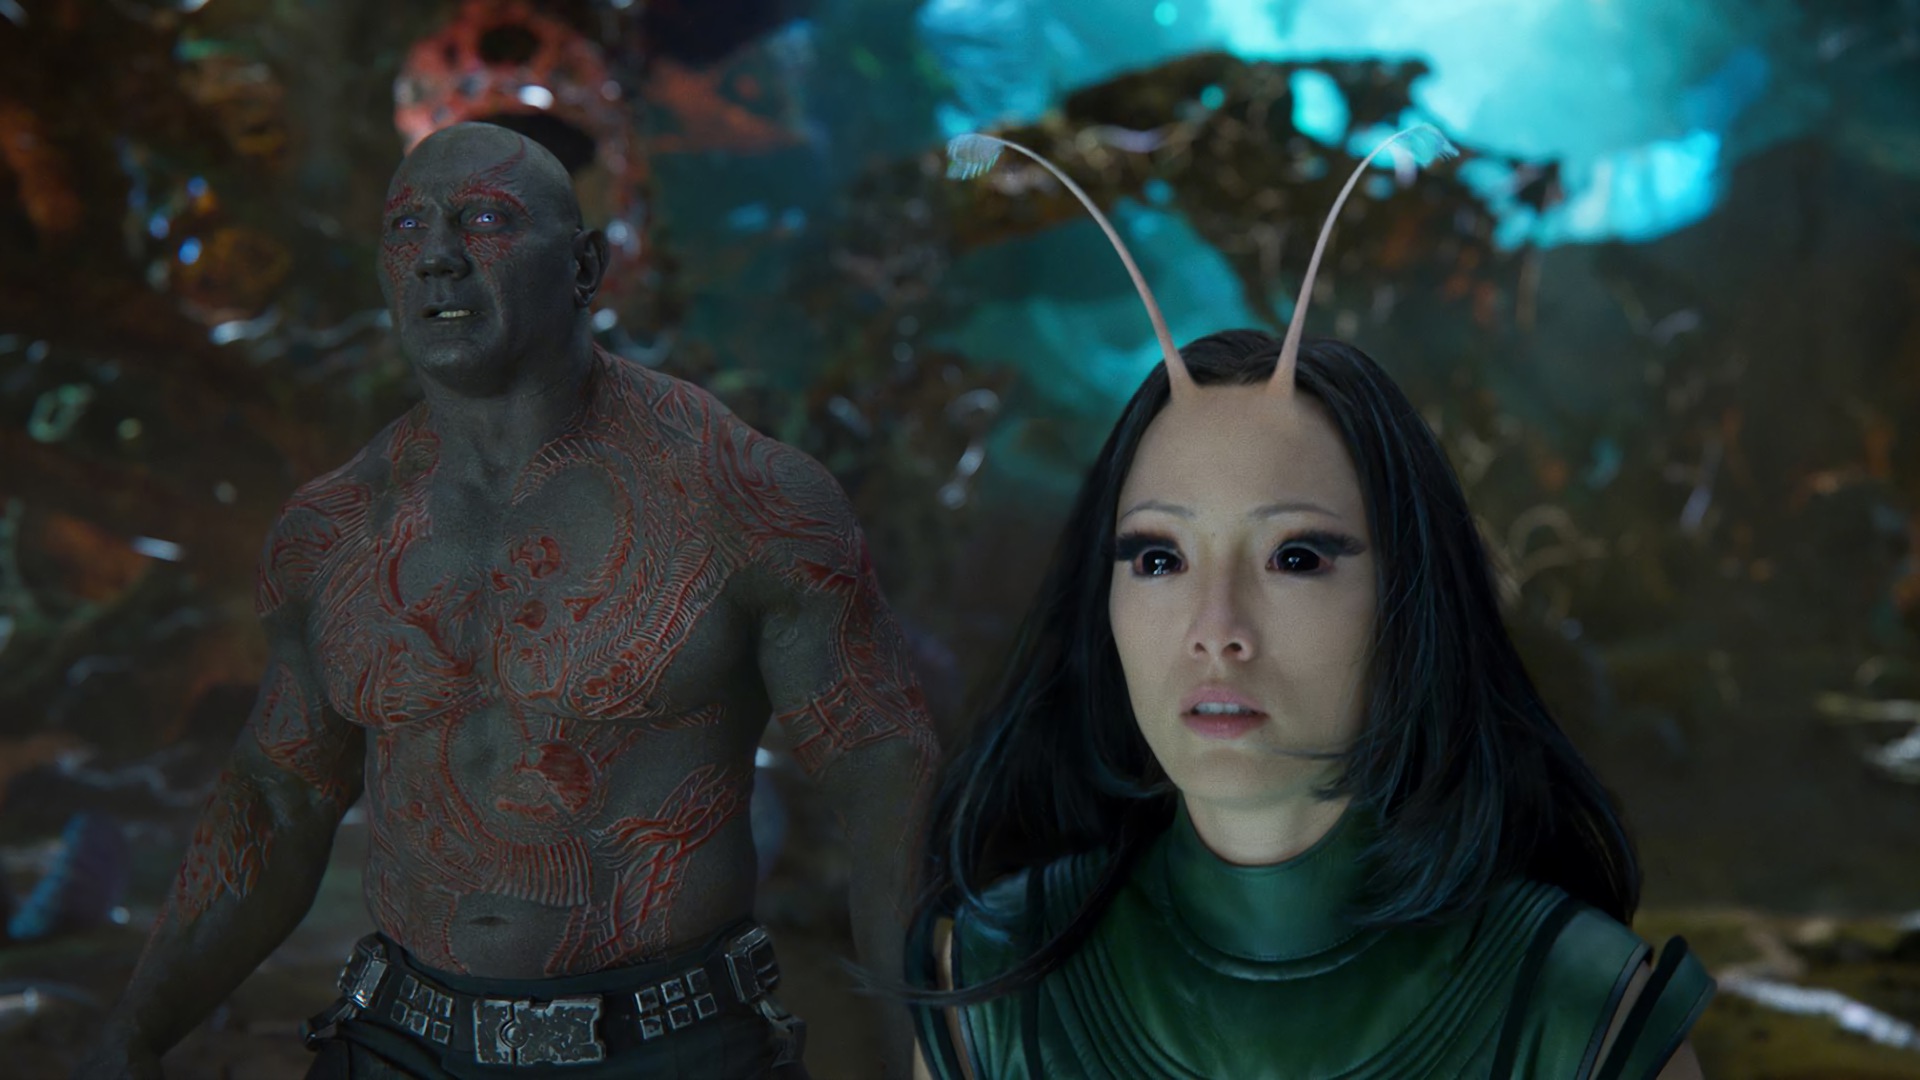 Dave Bautista Discusses The Depth And Heartbreak Behind Drax In